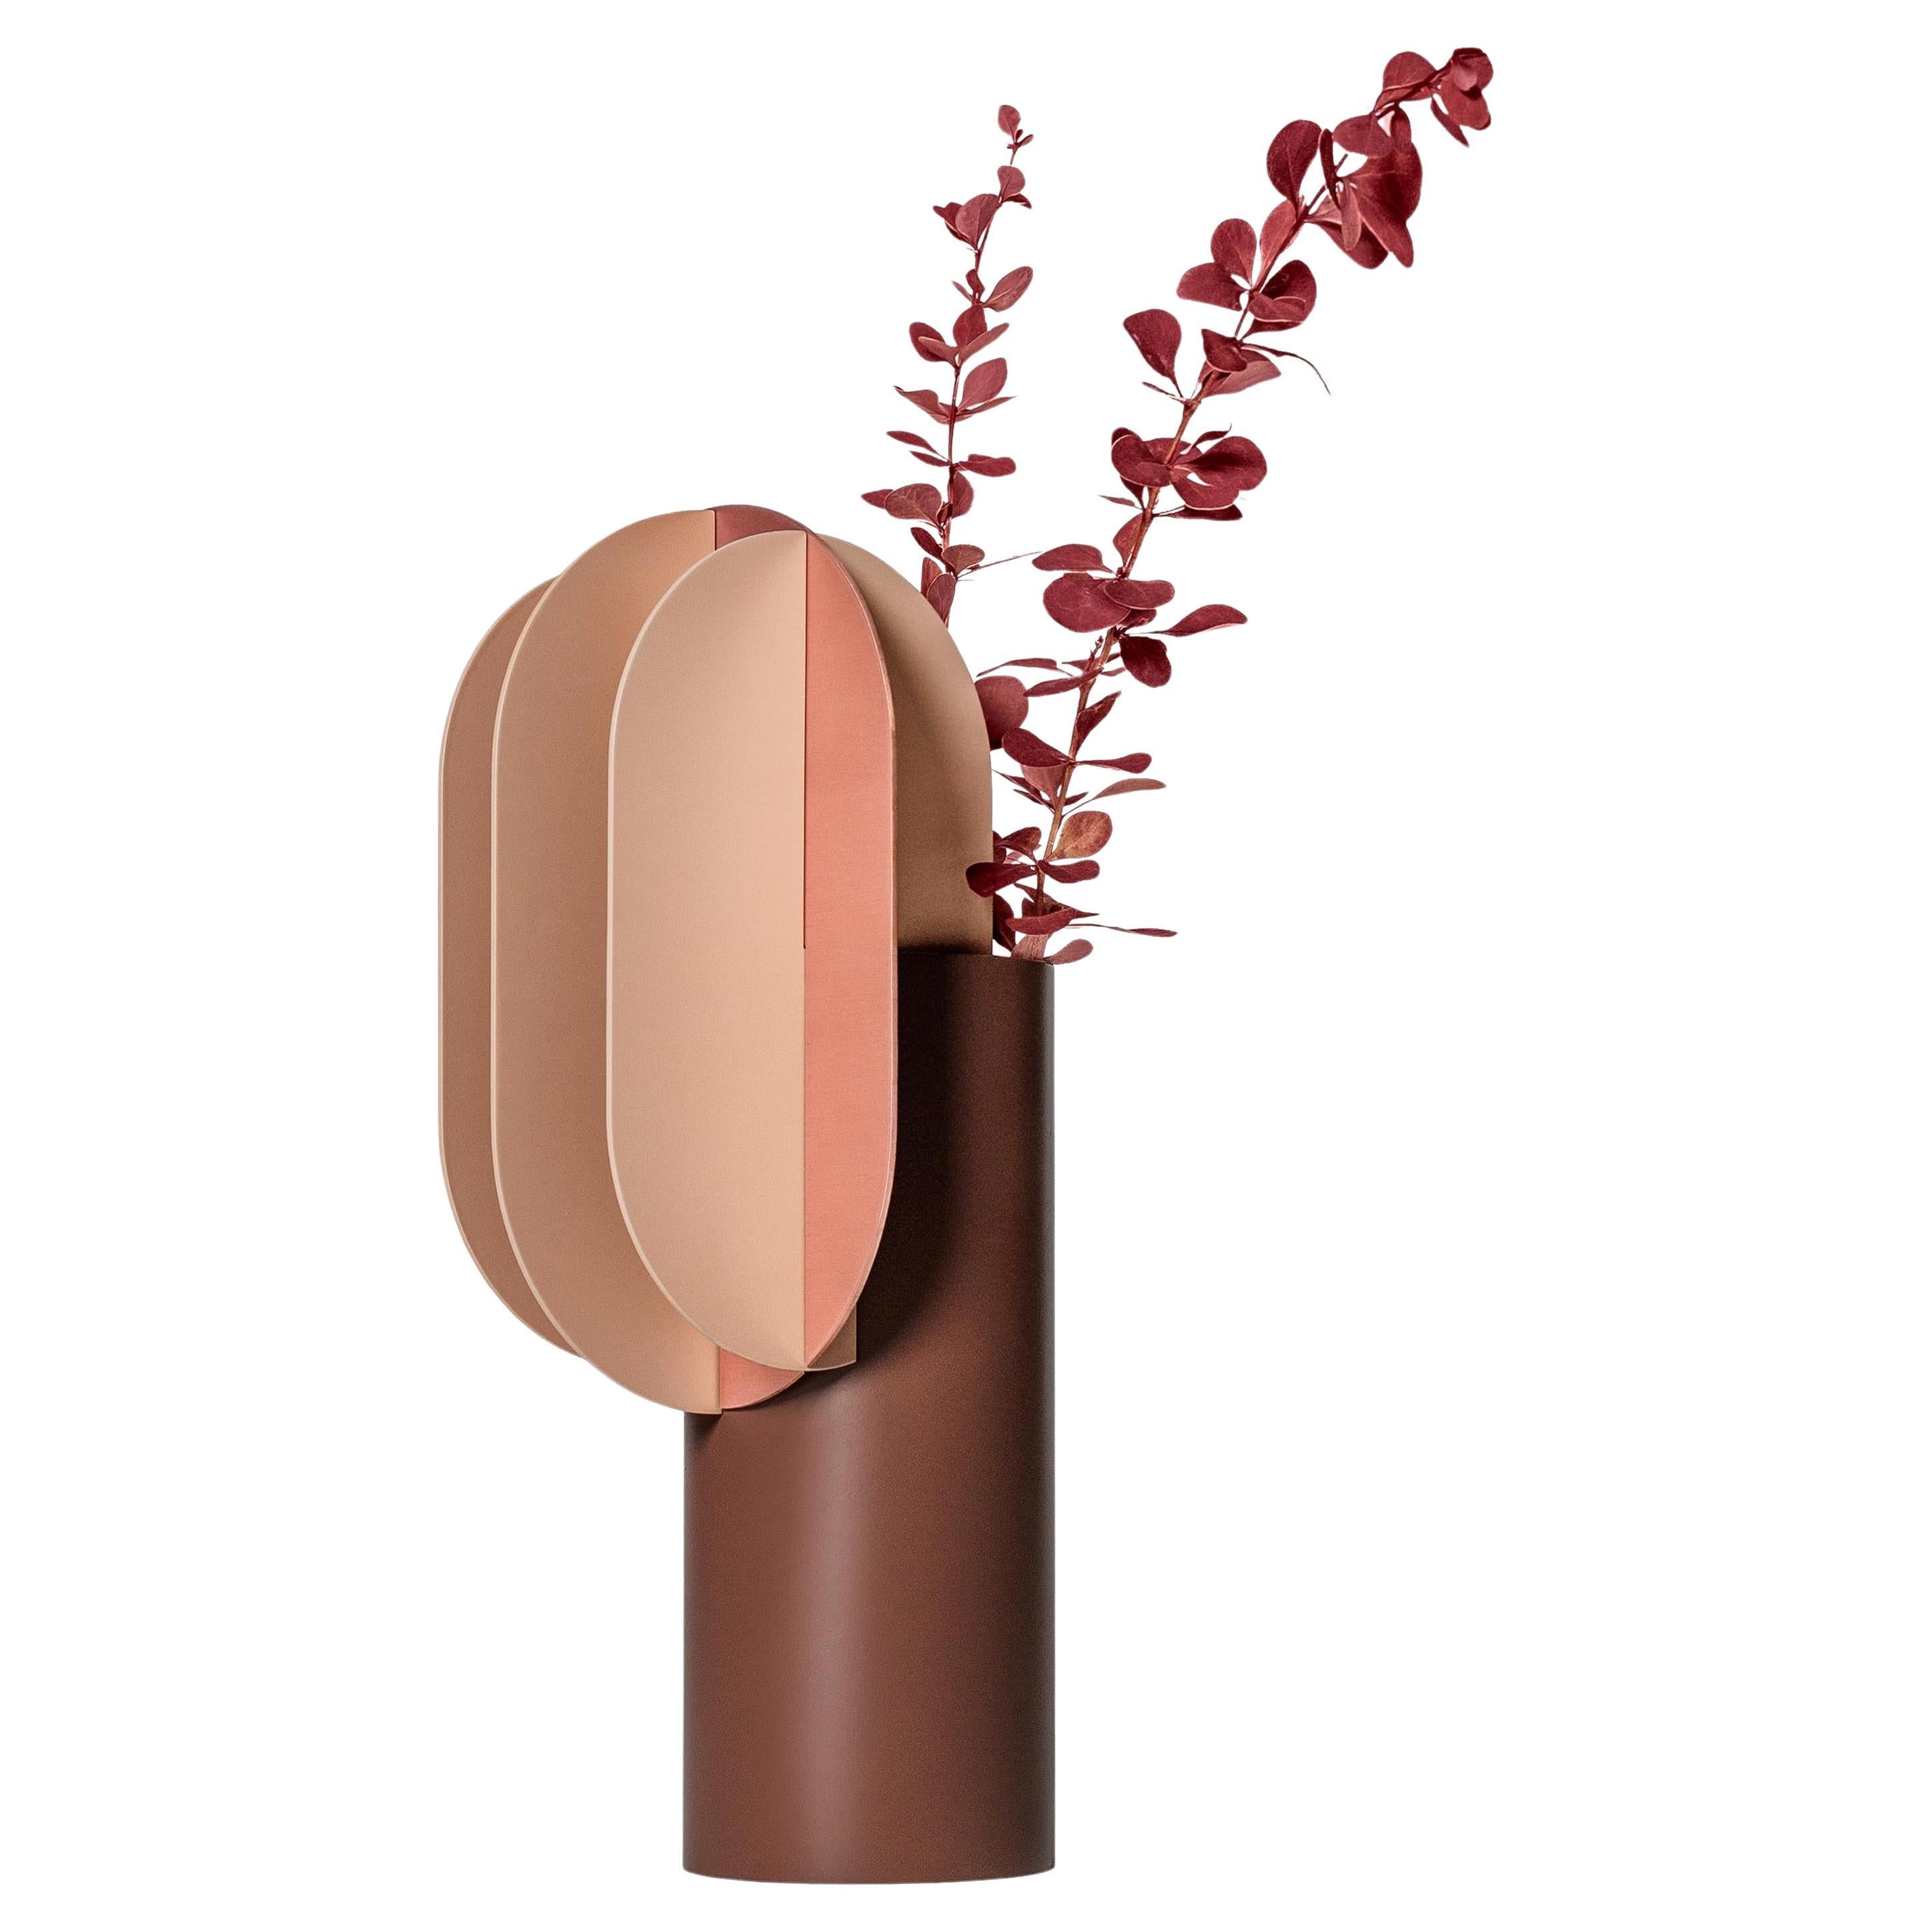 Contemporary Vase 'Gabo CS7' by Noom, Copper and Steel